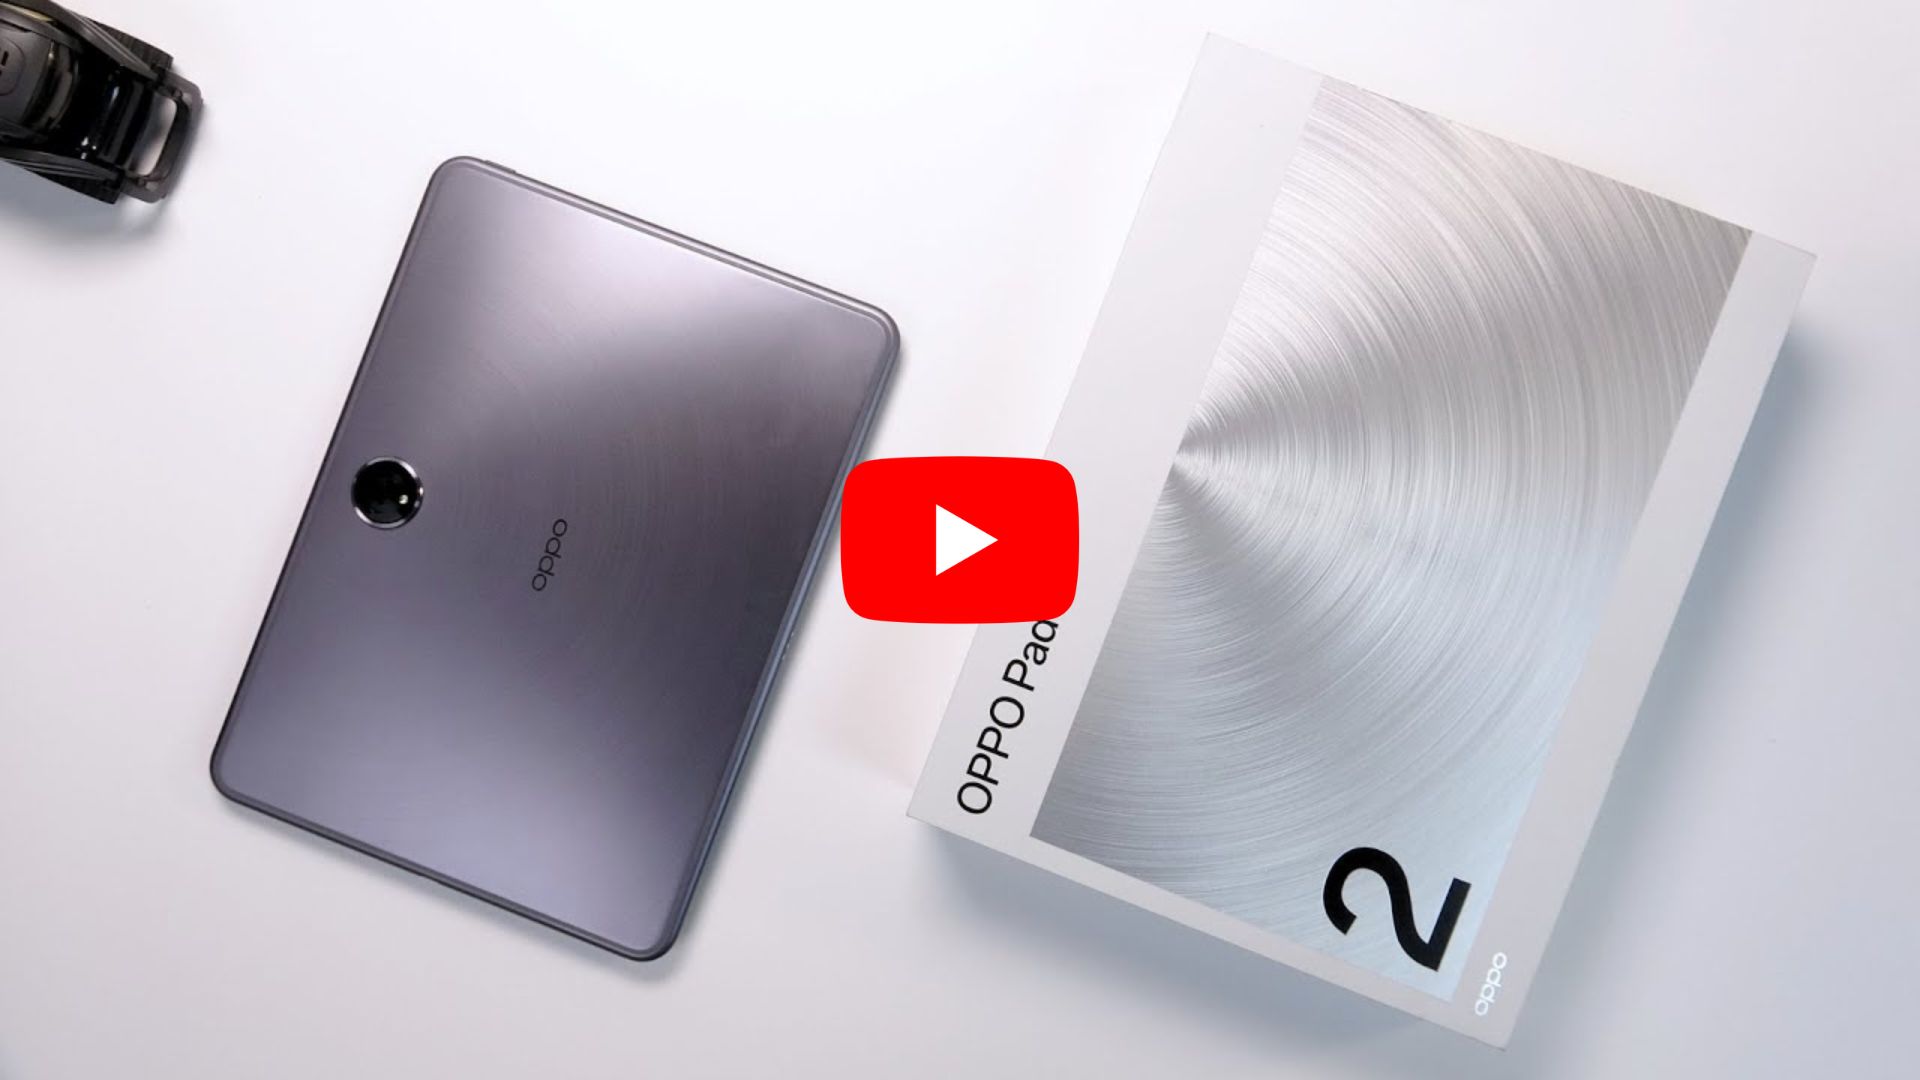 Oppo Pad 2 Unboxing  Hands-On, Antutu, Design, Unbox, Camera Test - GSM  FULL INFO %